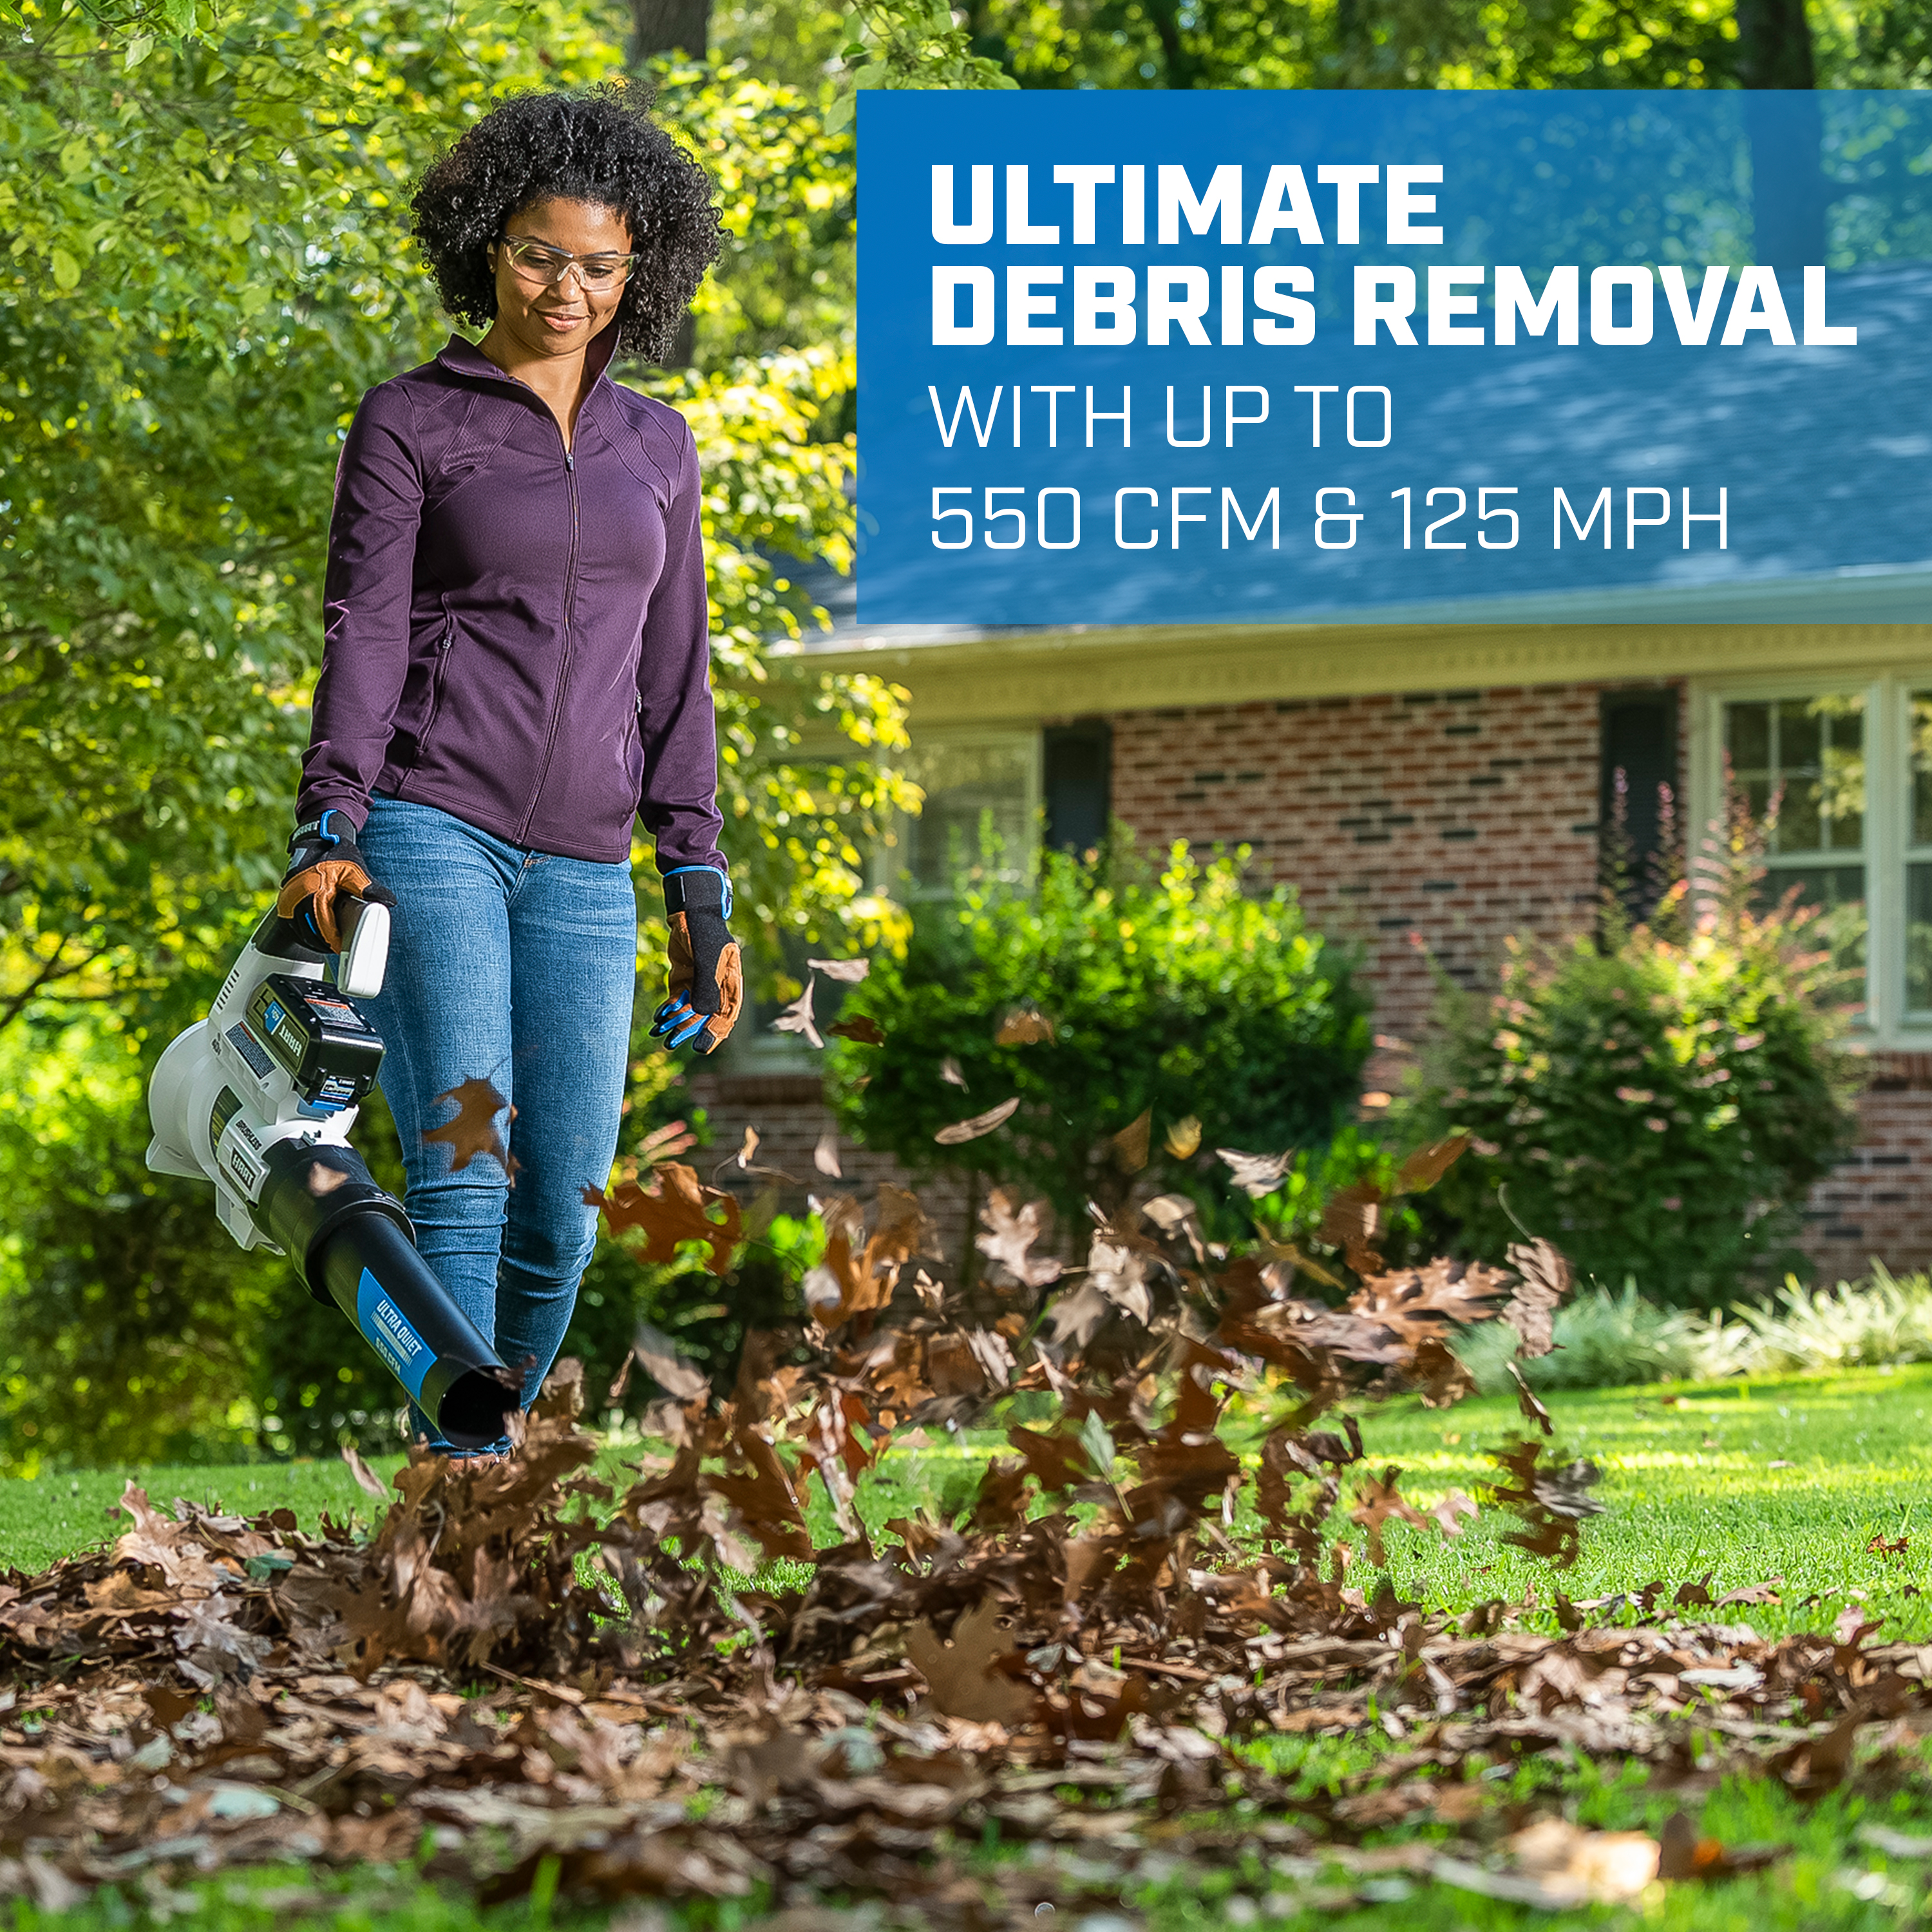 Ultimate Debris Removal with up to 550 CFM and 125 MPH